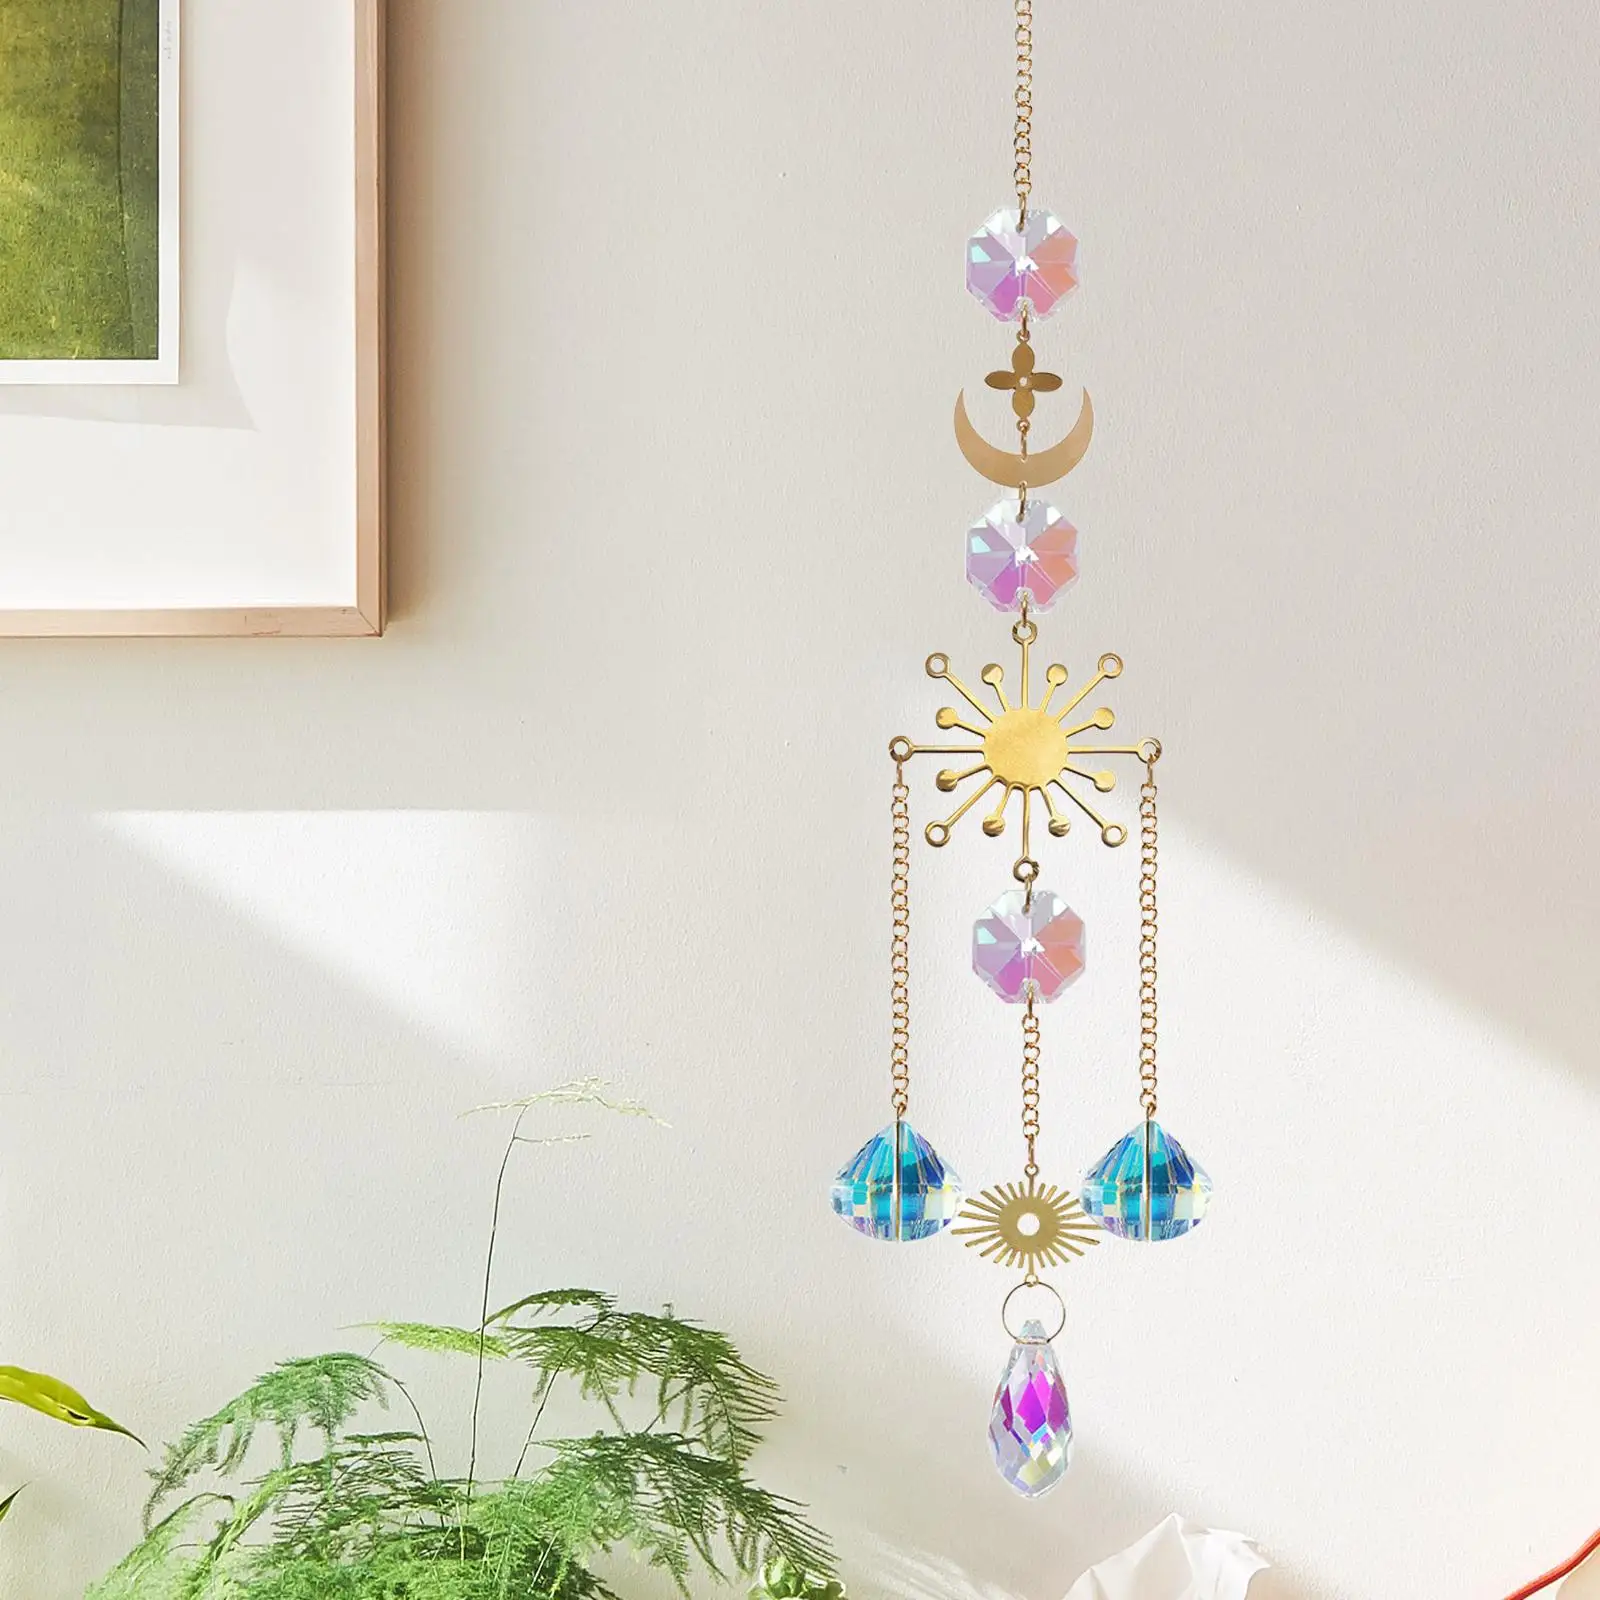 Hanging  Decor Ornaments  Gifts Decoration Pendant for Windows  Catching Yard Office